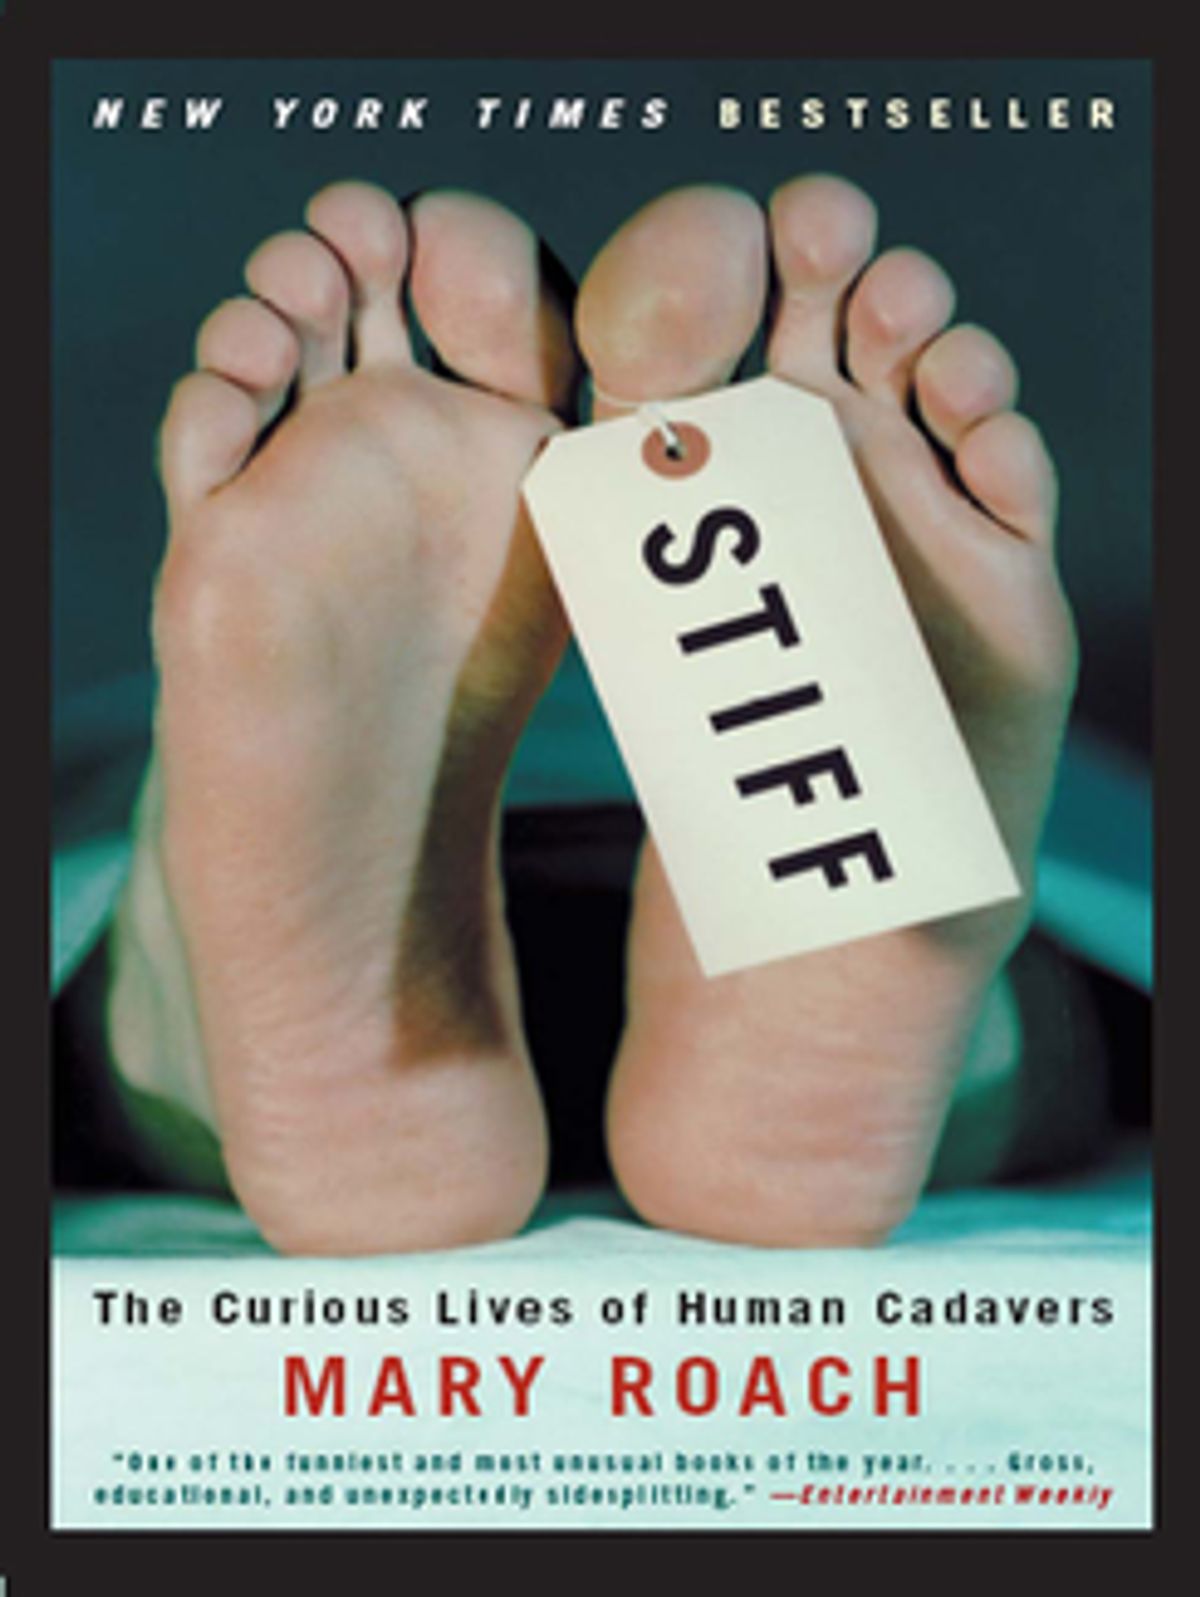 Book cover art: The feet of a cadavor.  A toe tag has the title of the book printed on it in bold capital letters, Stiff.  Underneath the feet, the author's name, Mary Roach.